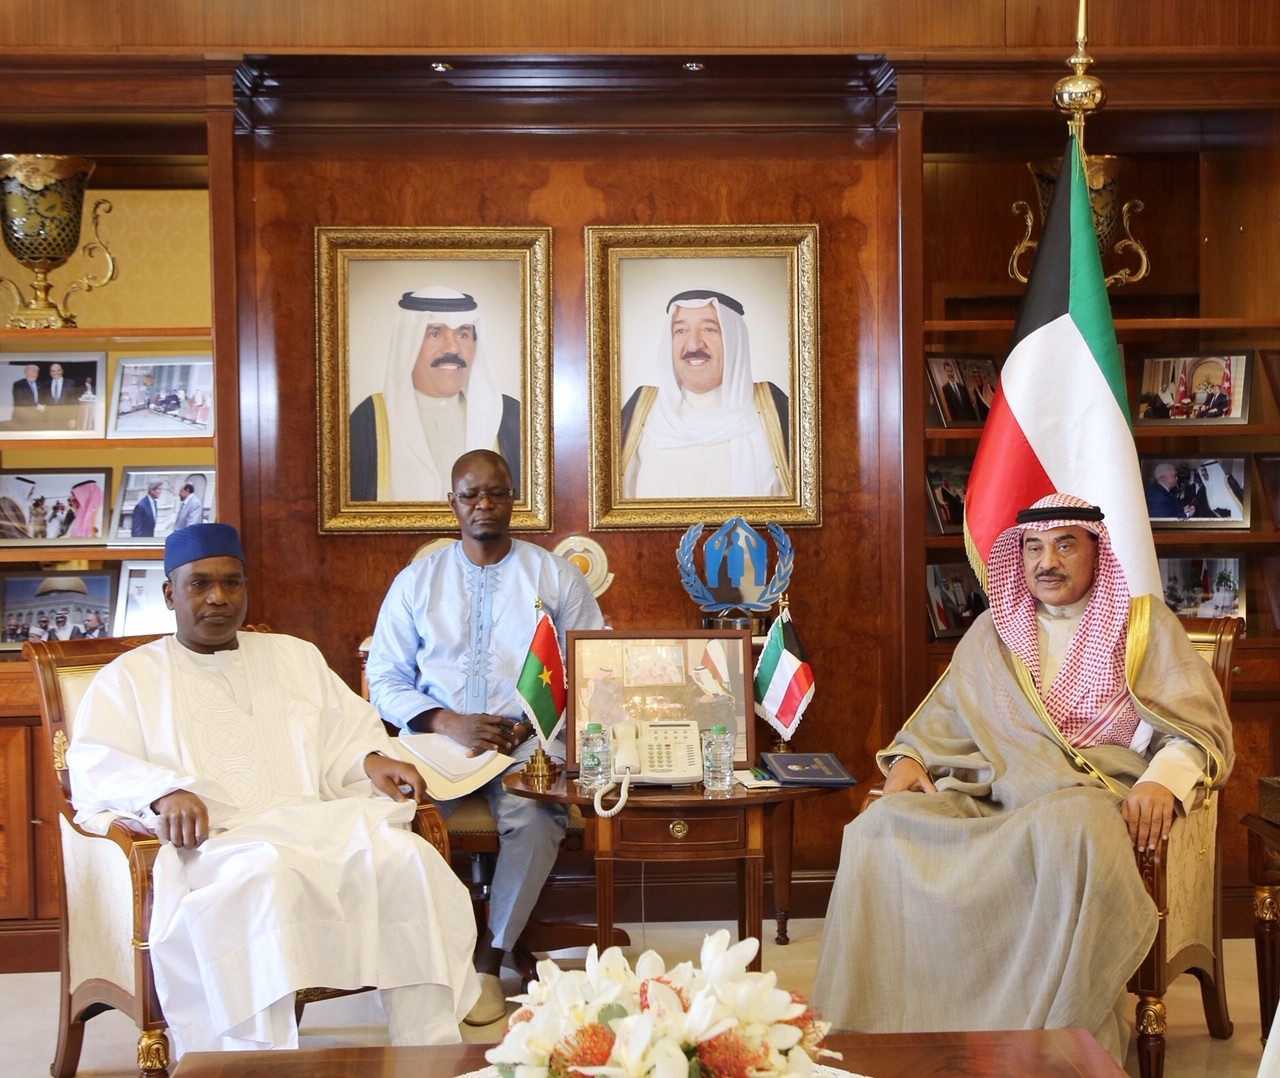 KuwaitI Foreign Minister received his counterpart of Burkina Faso